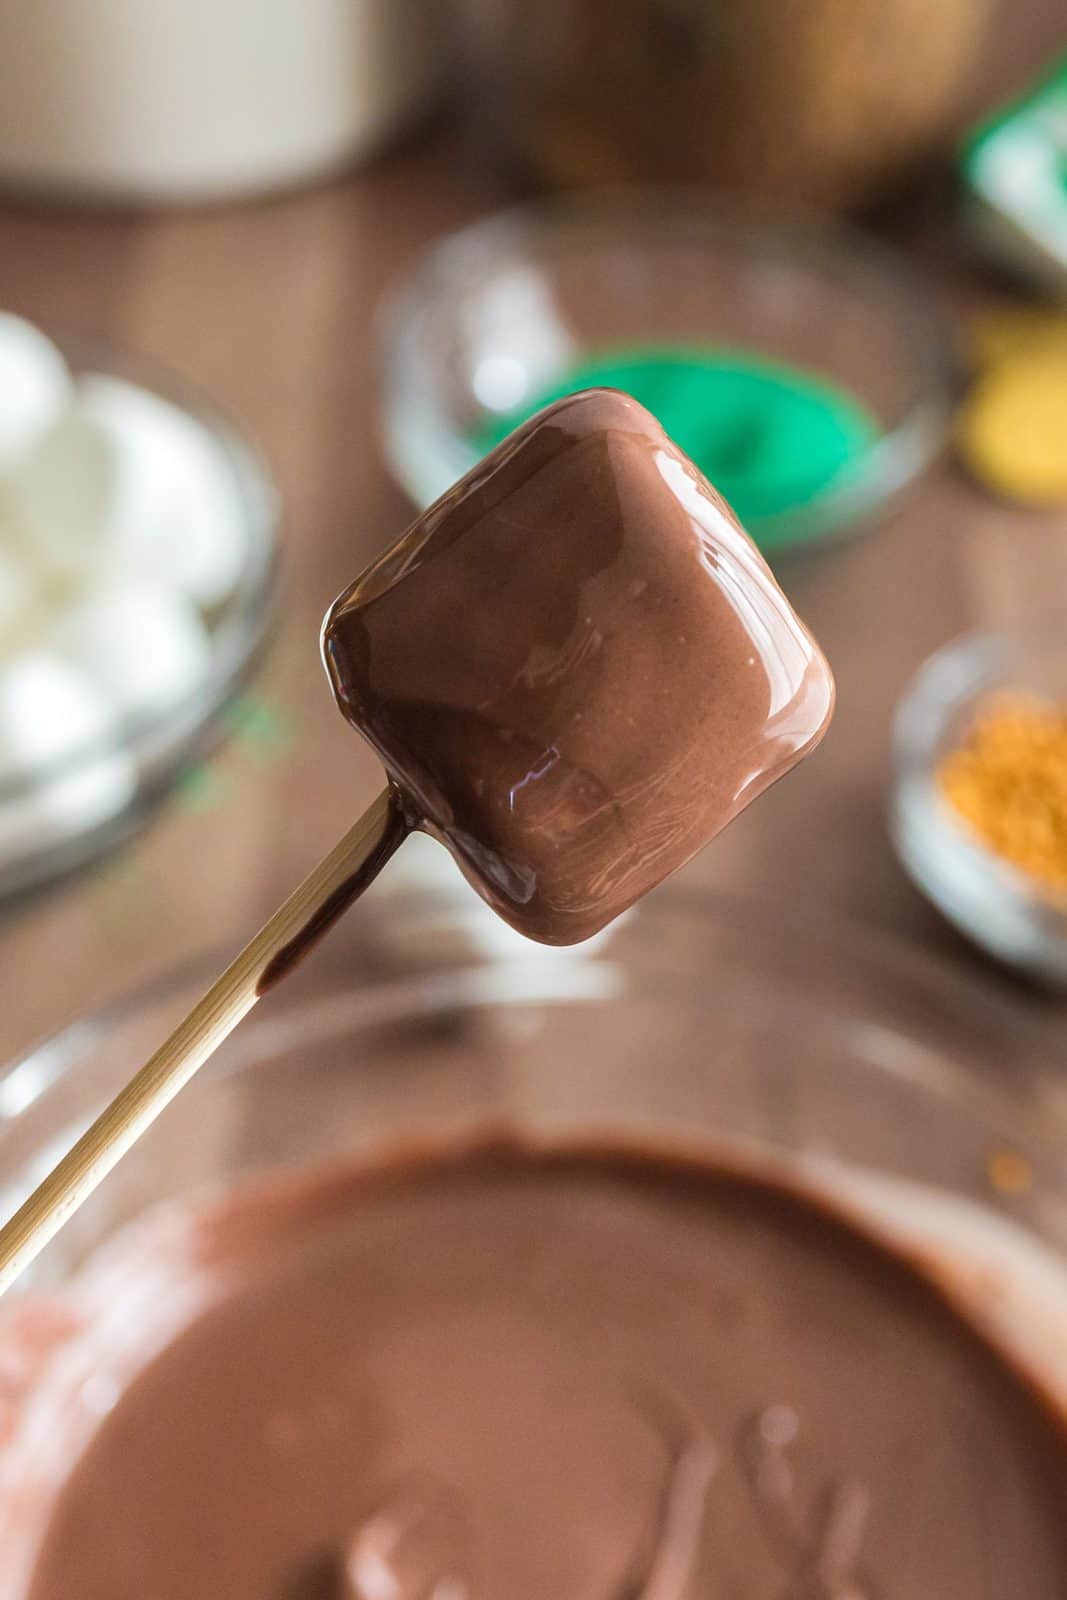 Marshmallow on stick dipped in melted chocolate.